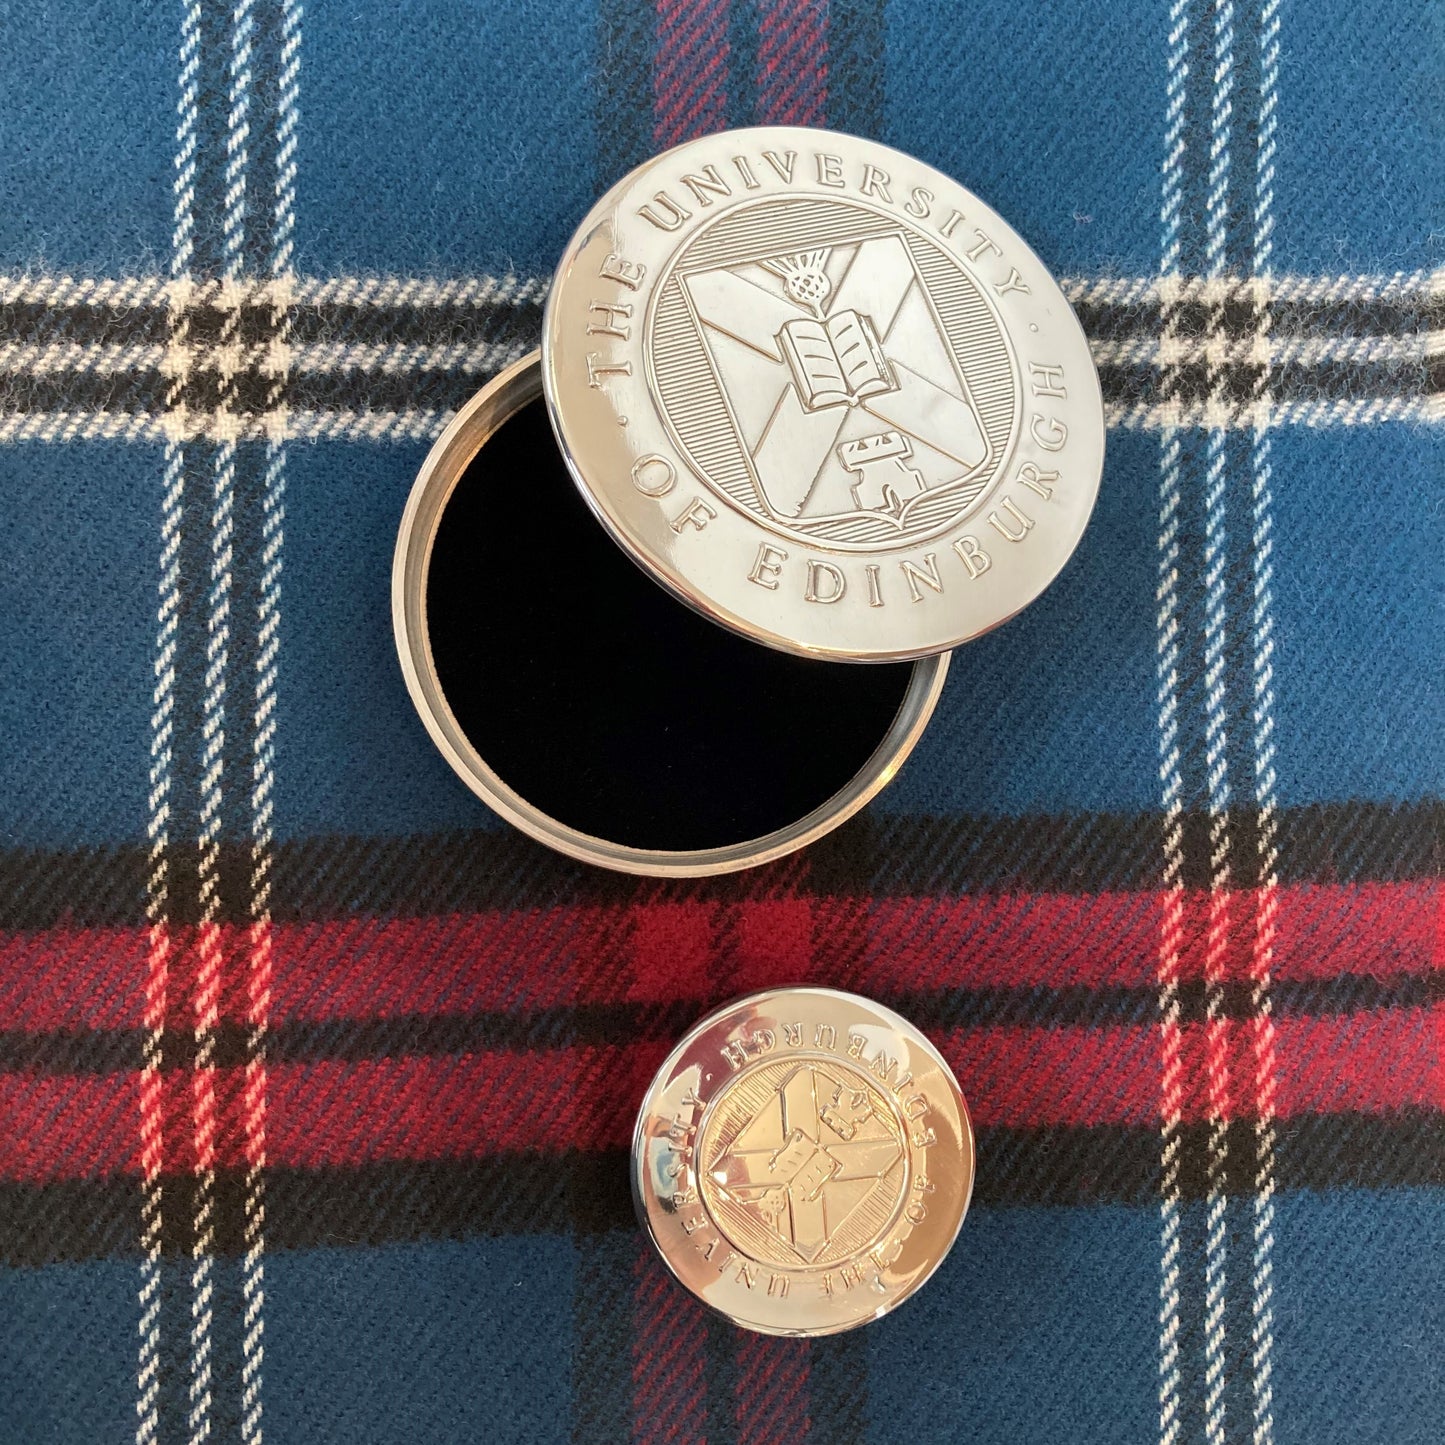 Both sizes of our trinket box displayed on a tartan background. 